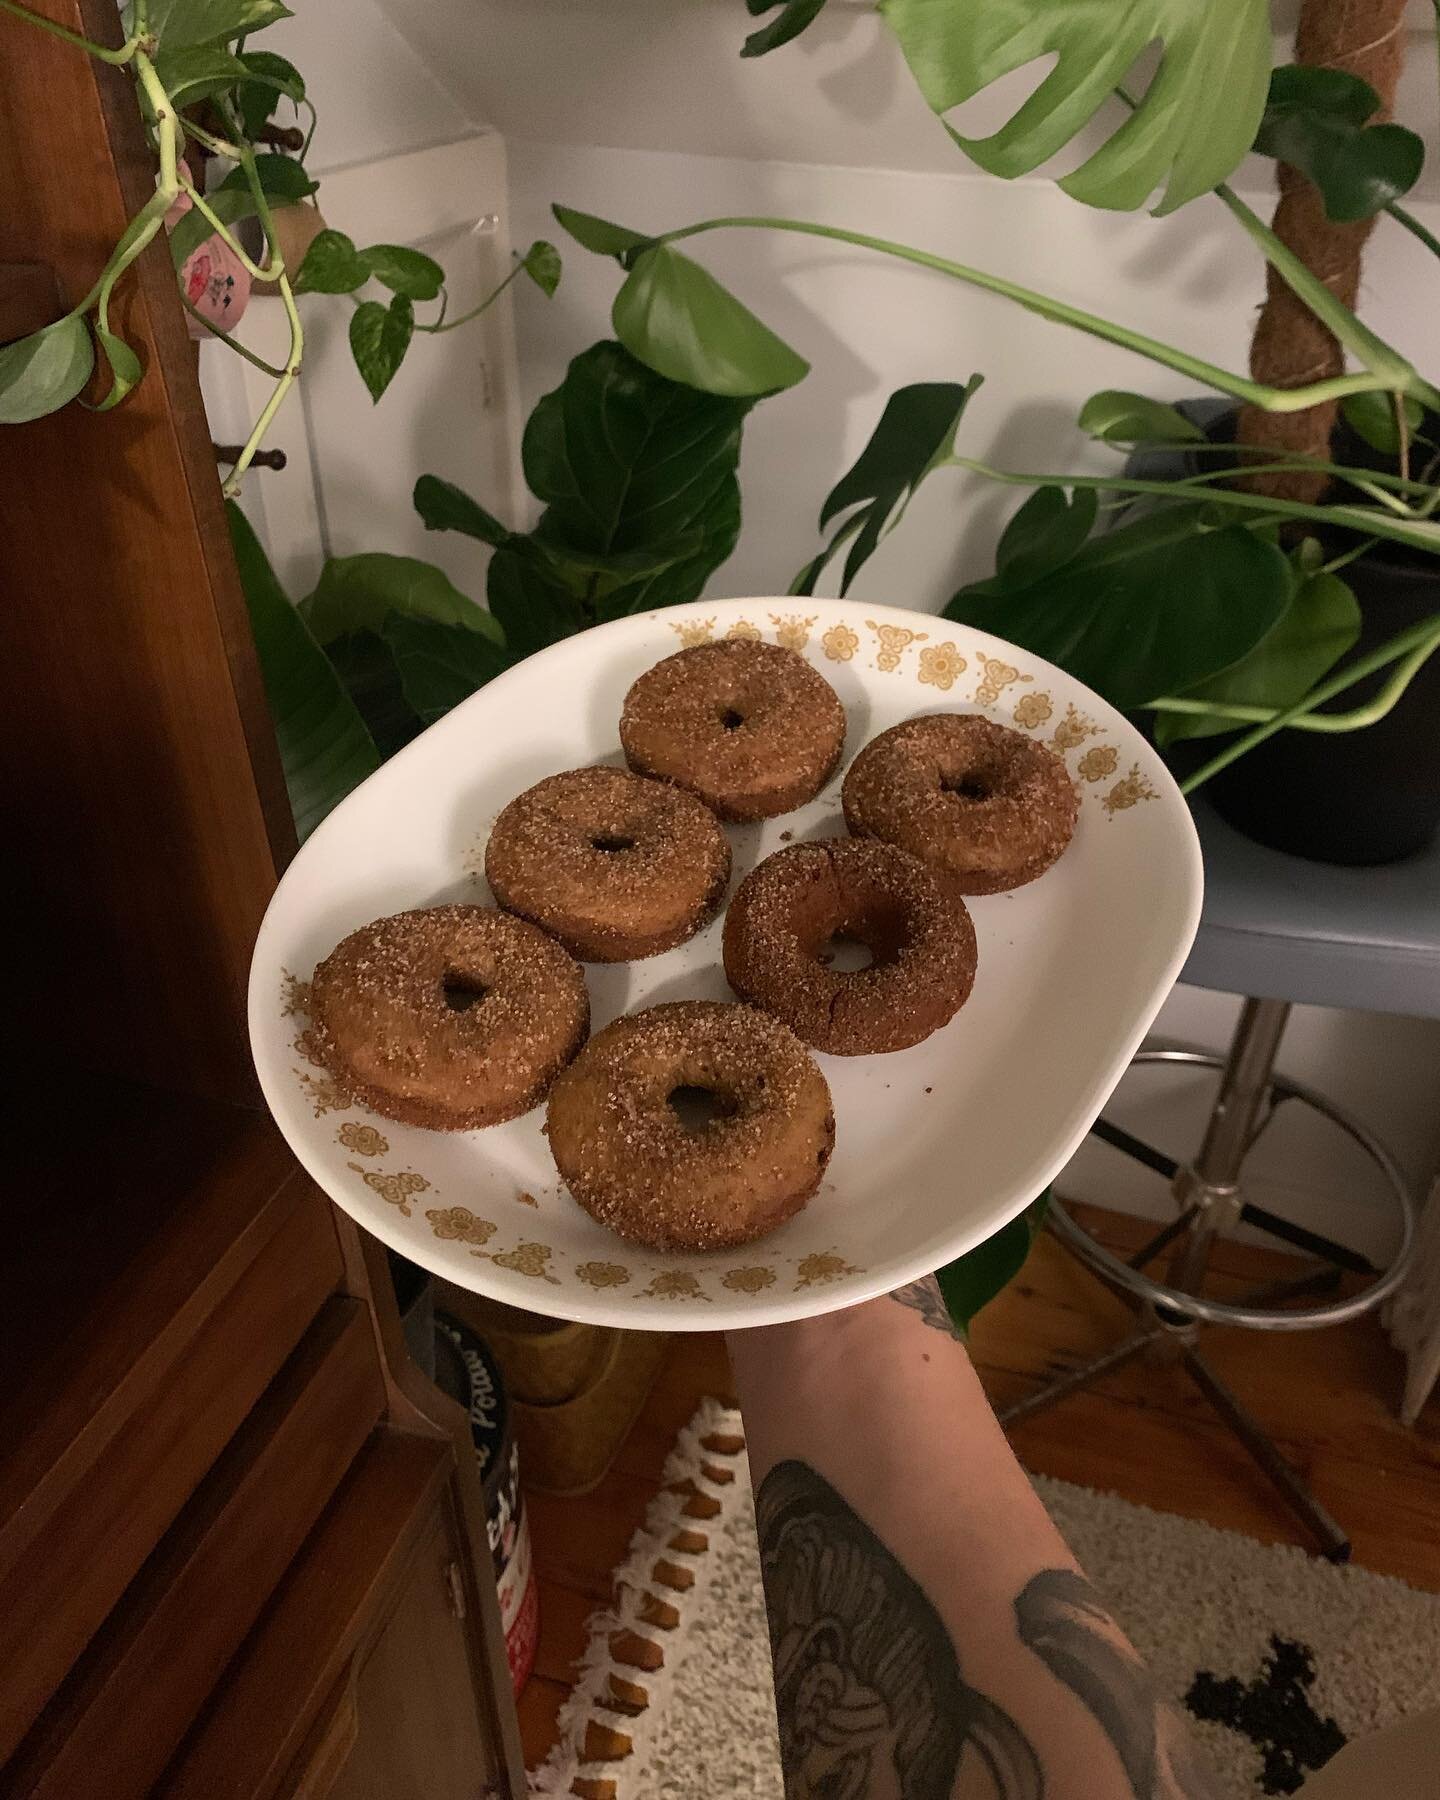 I&rsquo;m just in a silly goofy fall mood 🎃🍁🍎 Made some vegan baked apple cider doughnuts last night since I couldn&rsquo;t find any local shops that make them! Added ginger and extra freshly shaved nutmeg *chefs kiss* &mdash; wish Nancy enjoyed s